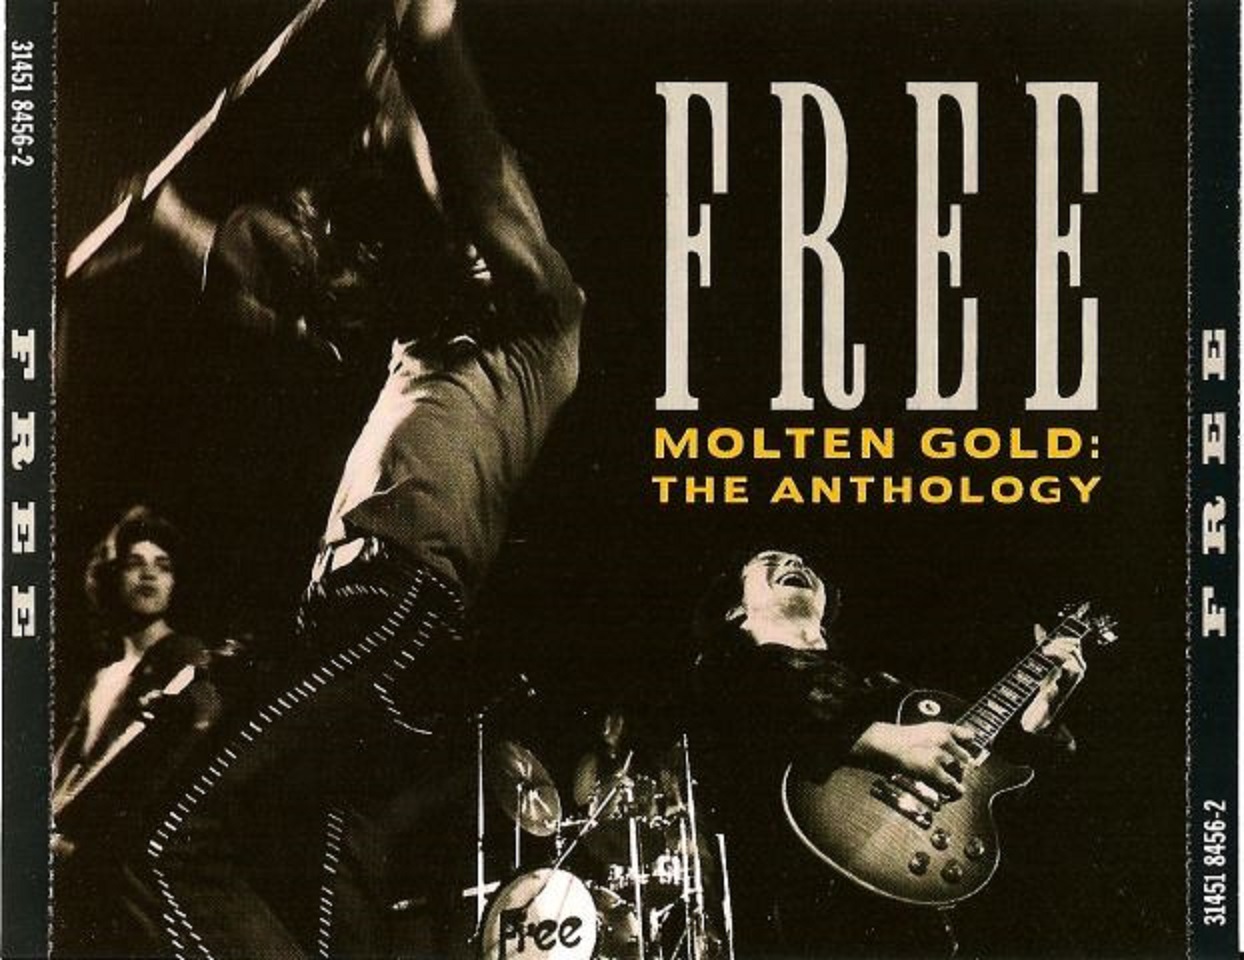 Free (GBR) - Molten Gold (The Anthology) (2CD)